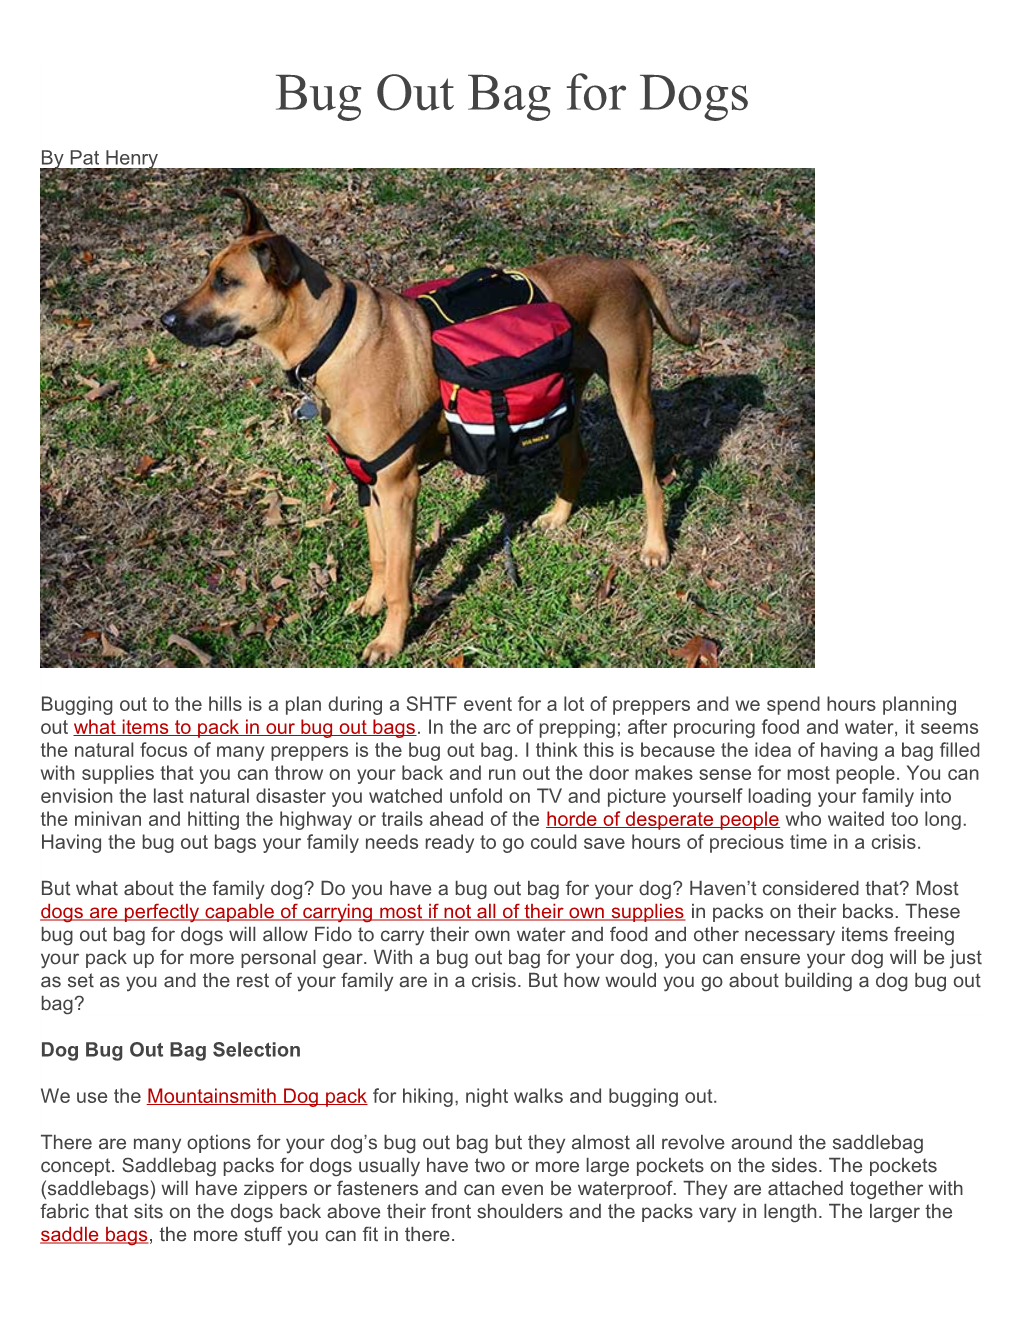 Bug out Bag for Dogs